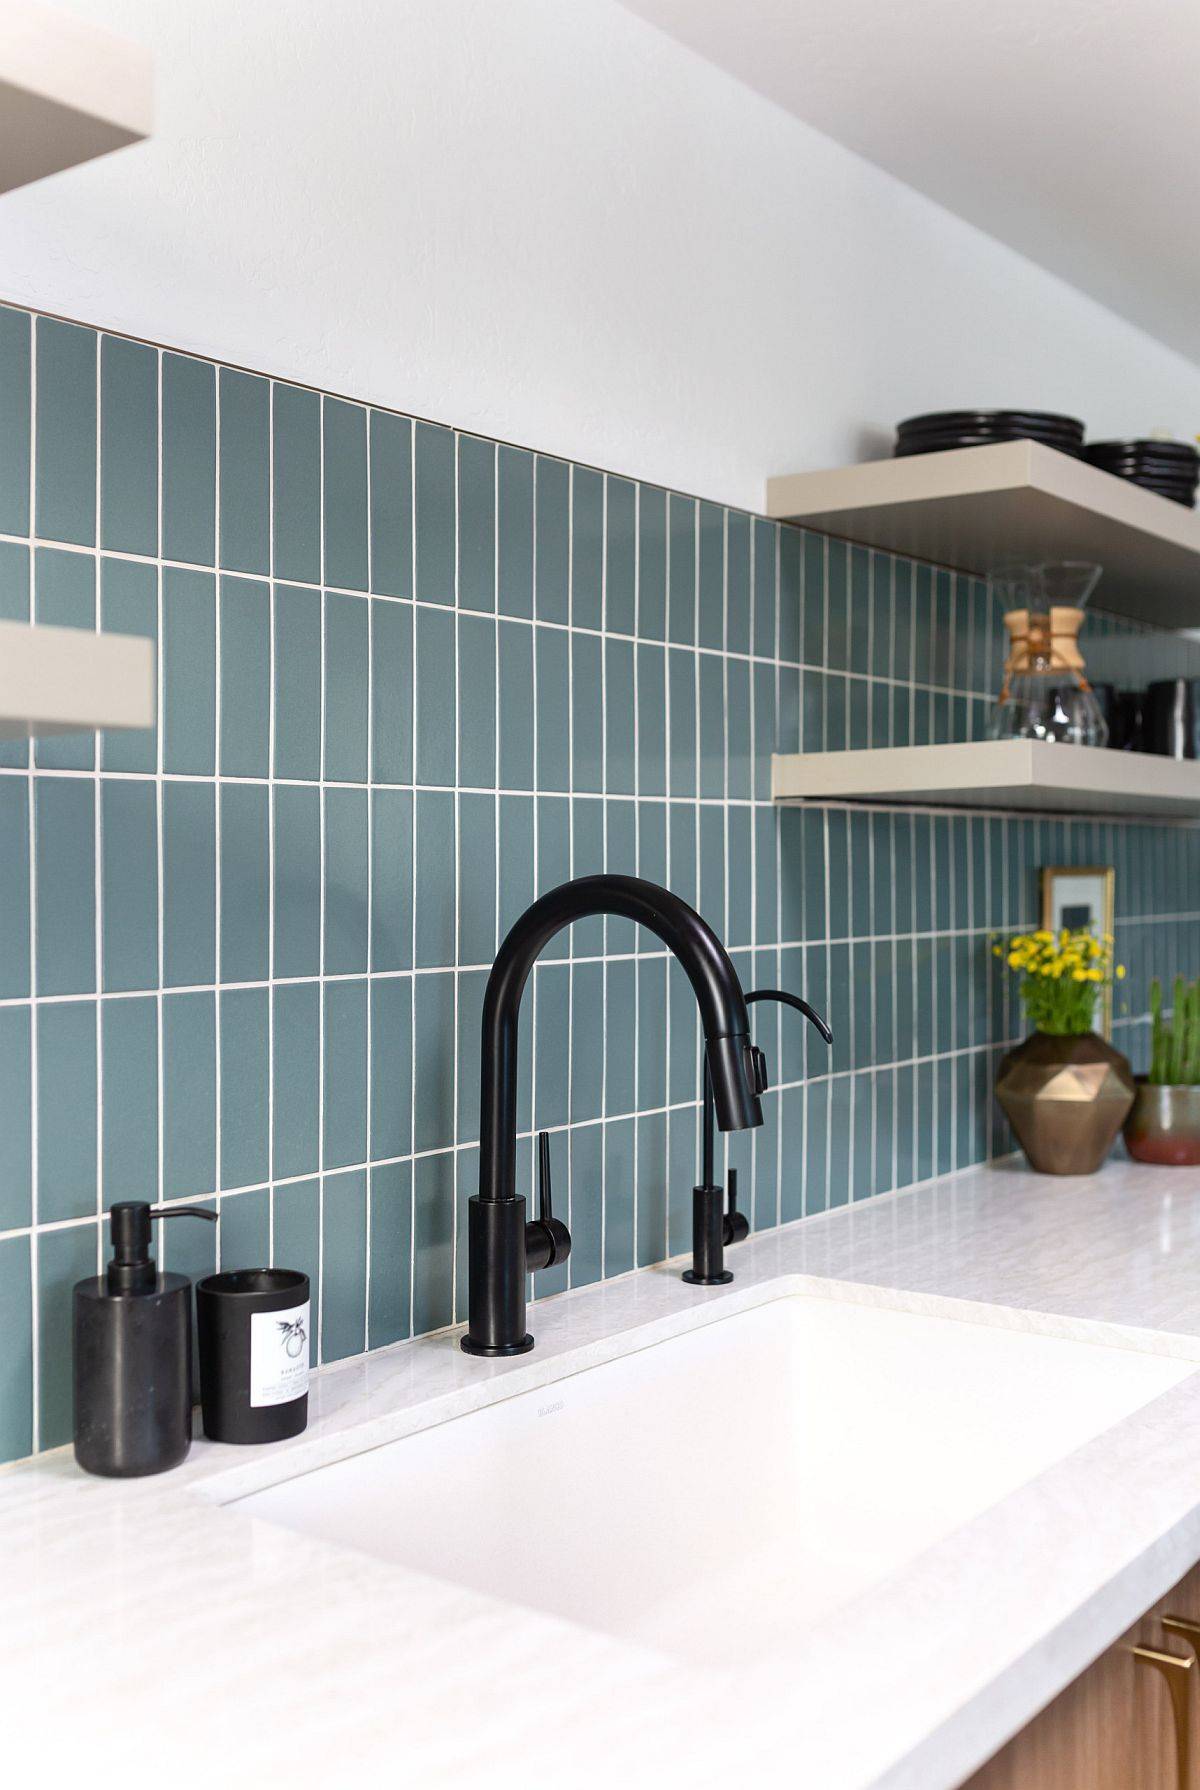 Closer look at the modern green-blue kitchen tiles used for the backdrop